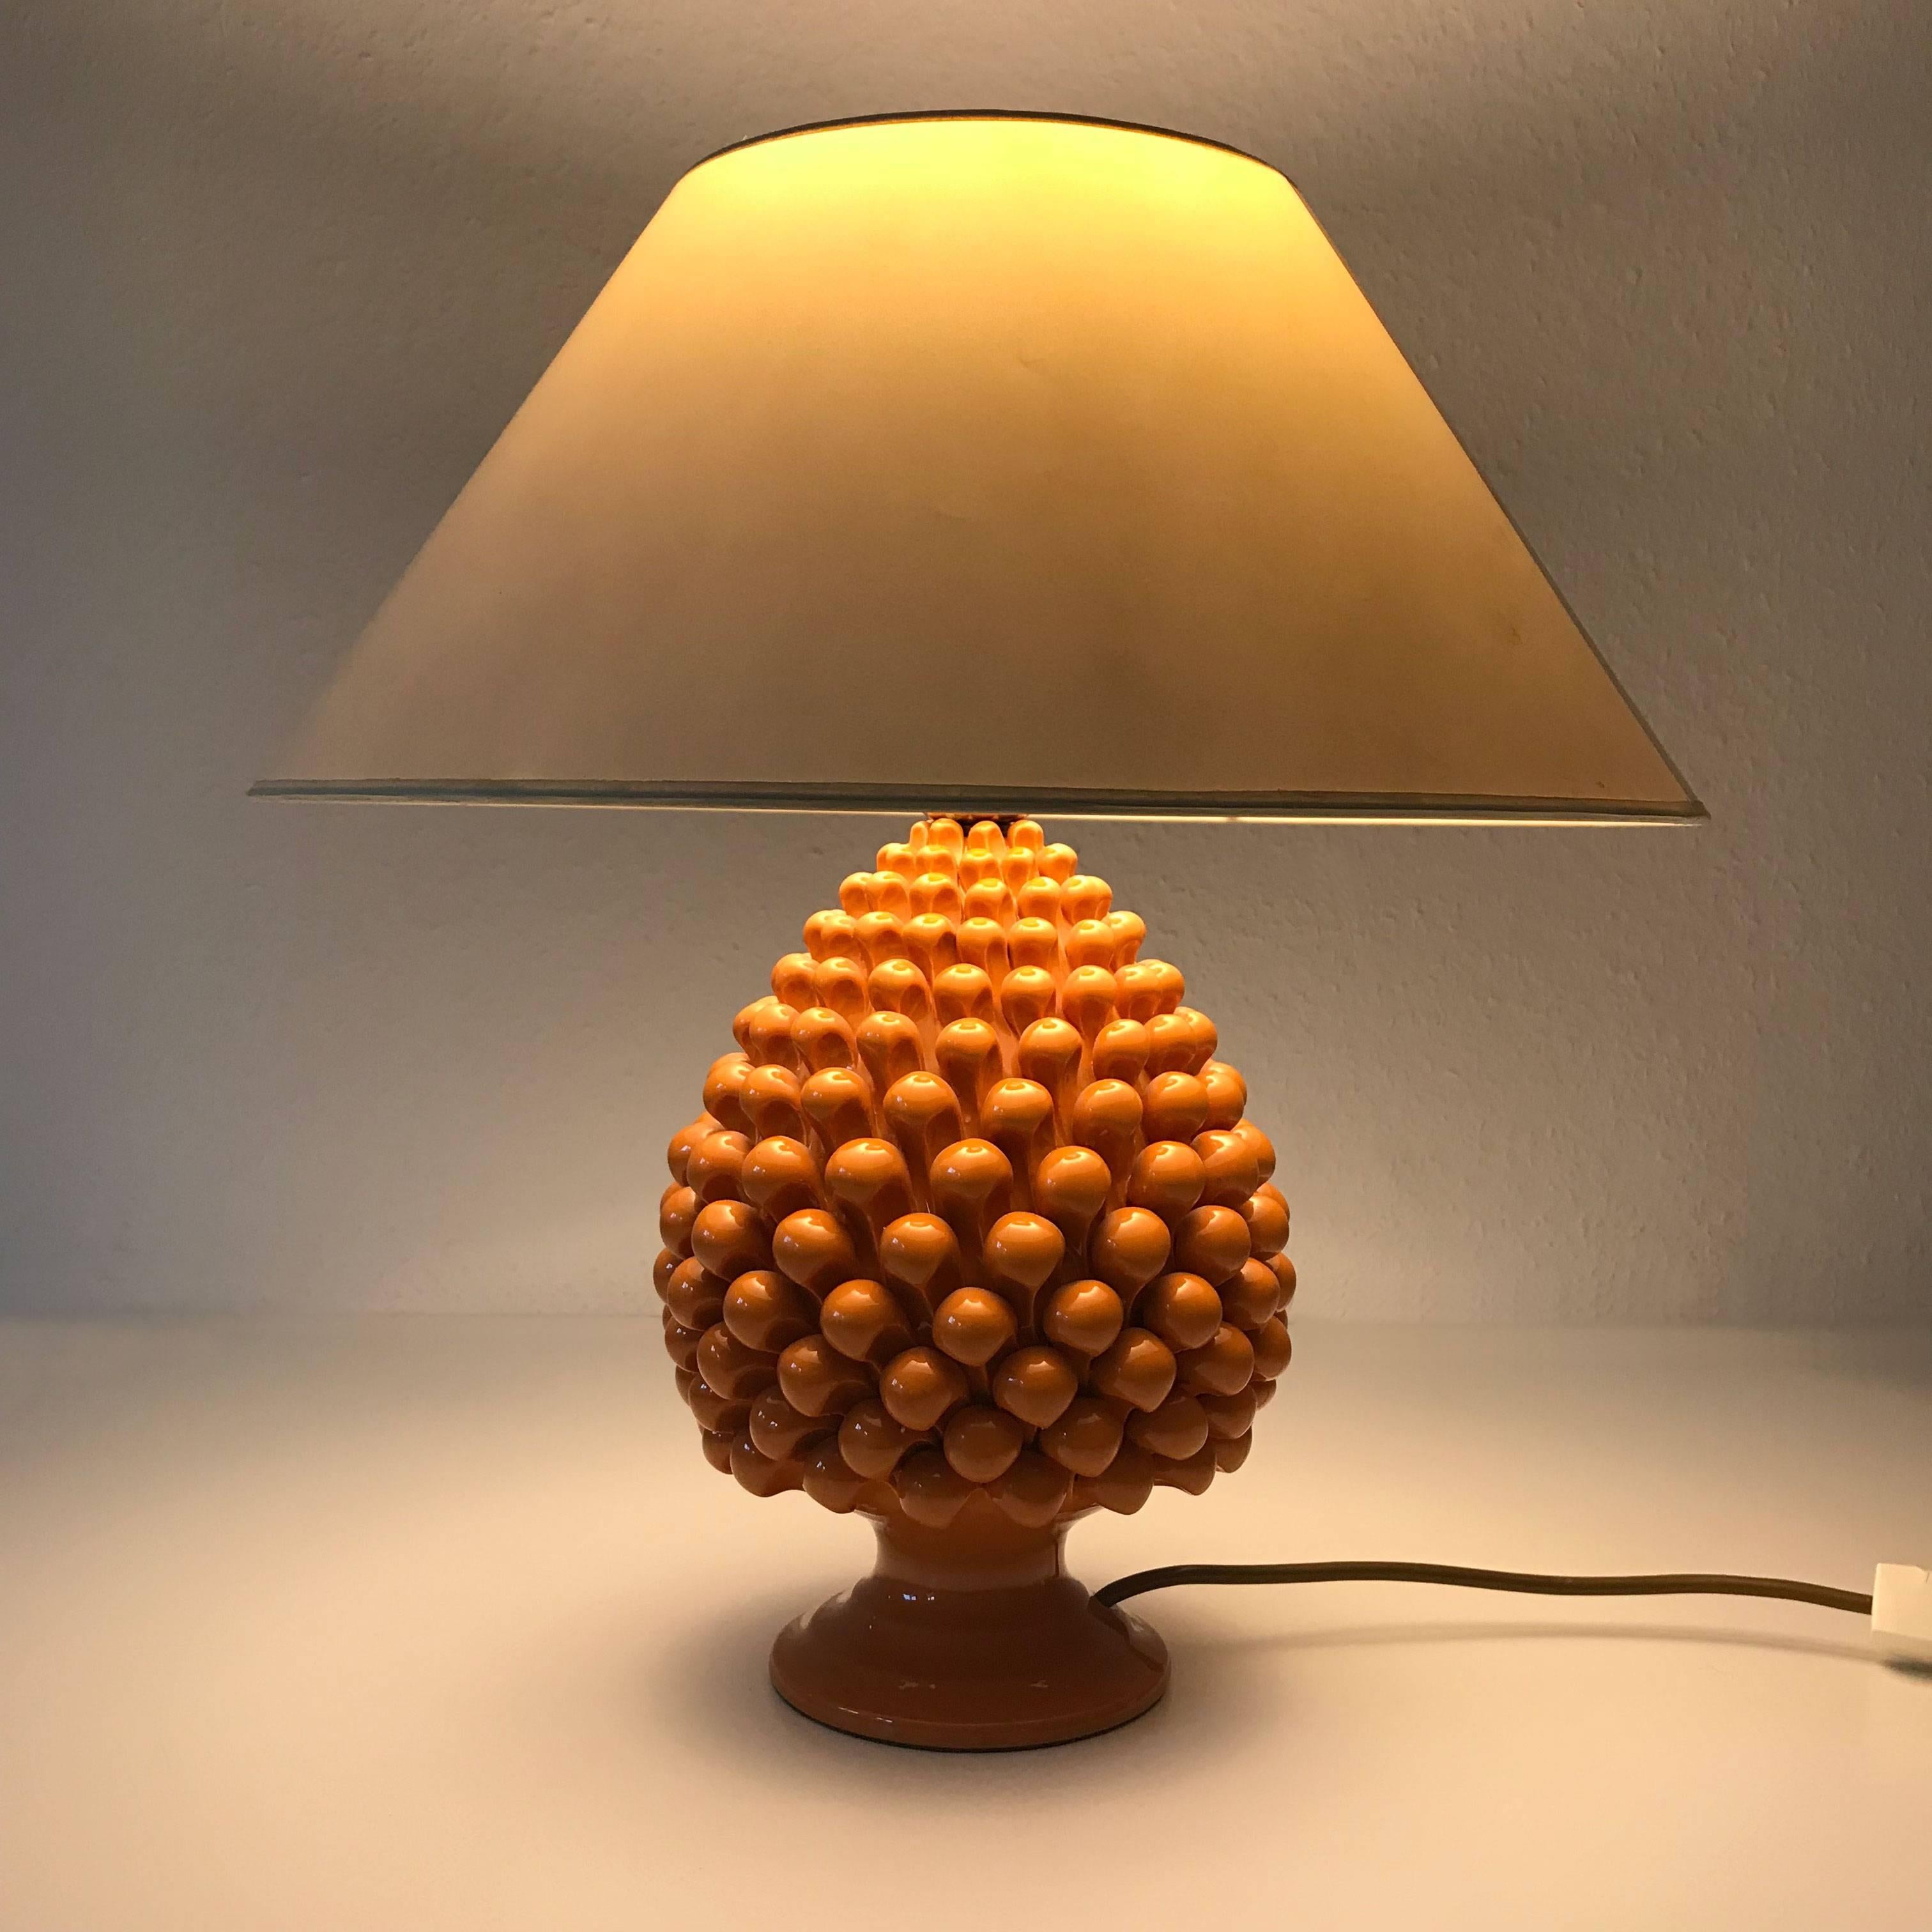 Highly decorative Mid-Century Modern table lamp with an orange ceramic base representing a pineapple. Designed probably by Marcello Fantoni, Italy, 1970s.

Executed in orange colored ceramic and fabric shade, the lamp needs 1 x E27 screw fit bulb